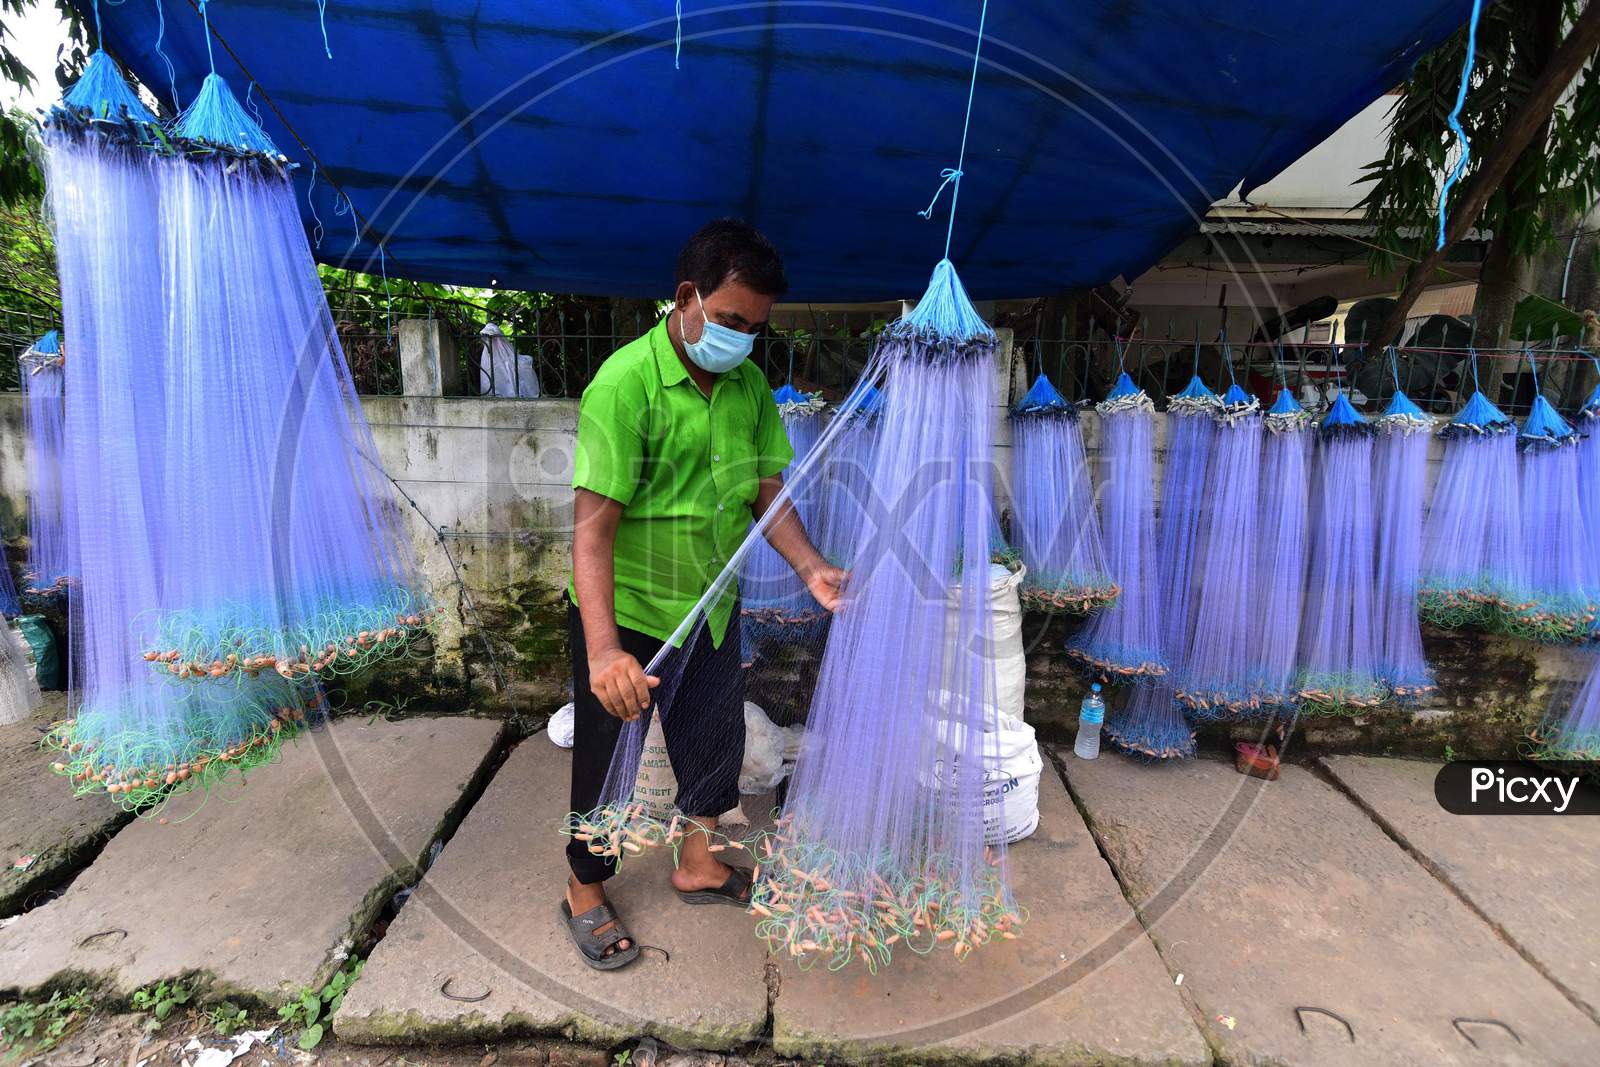 A Vendor Arranges  Fishing Net On His Roadside Shop For Sale During Nationwide Lockdown 5.0 of Coronavirus or COVID-19  In Nagaon District In The Northeastern State Of Assam, India On June 9,2020.